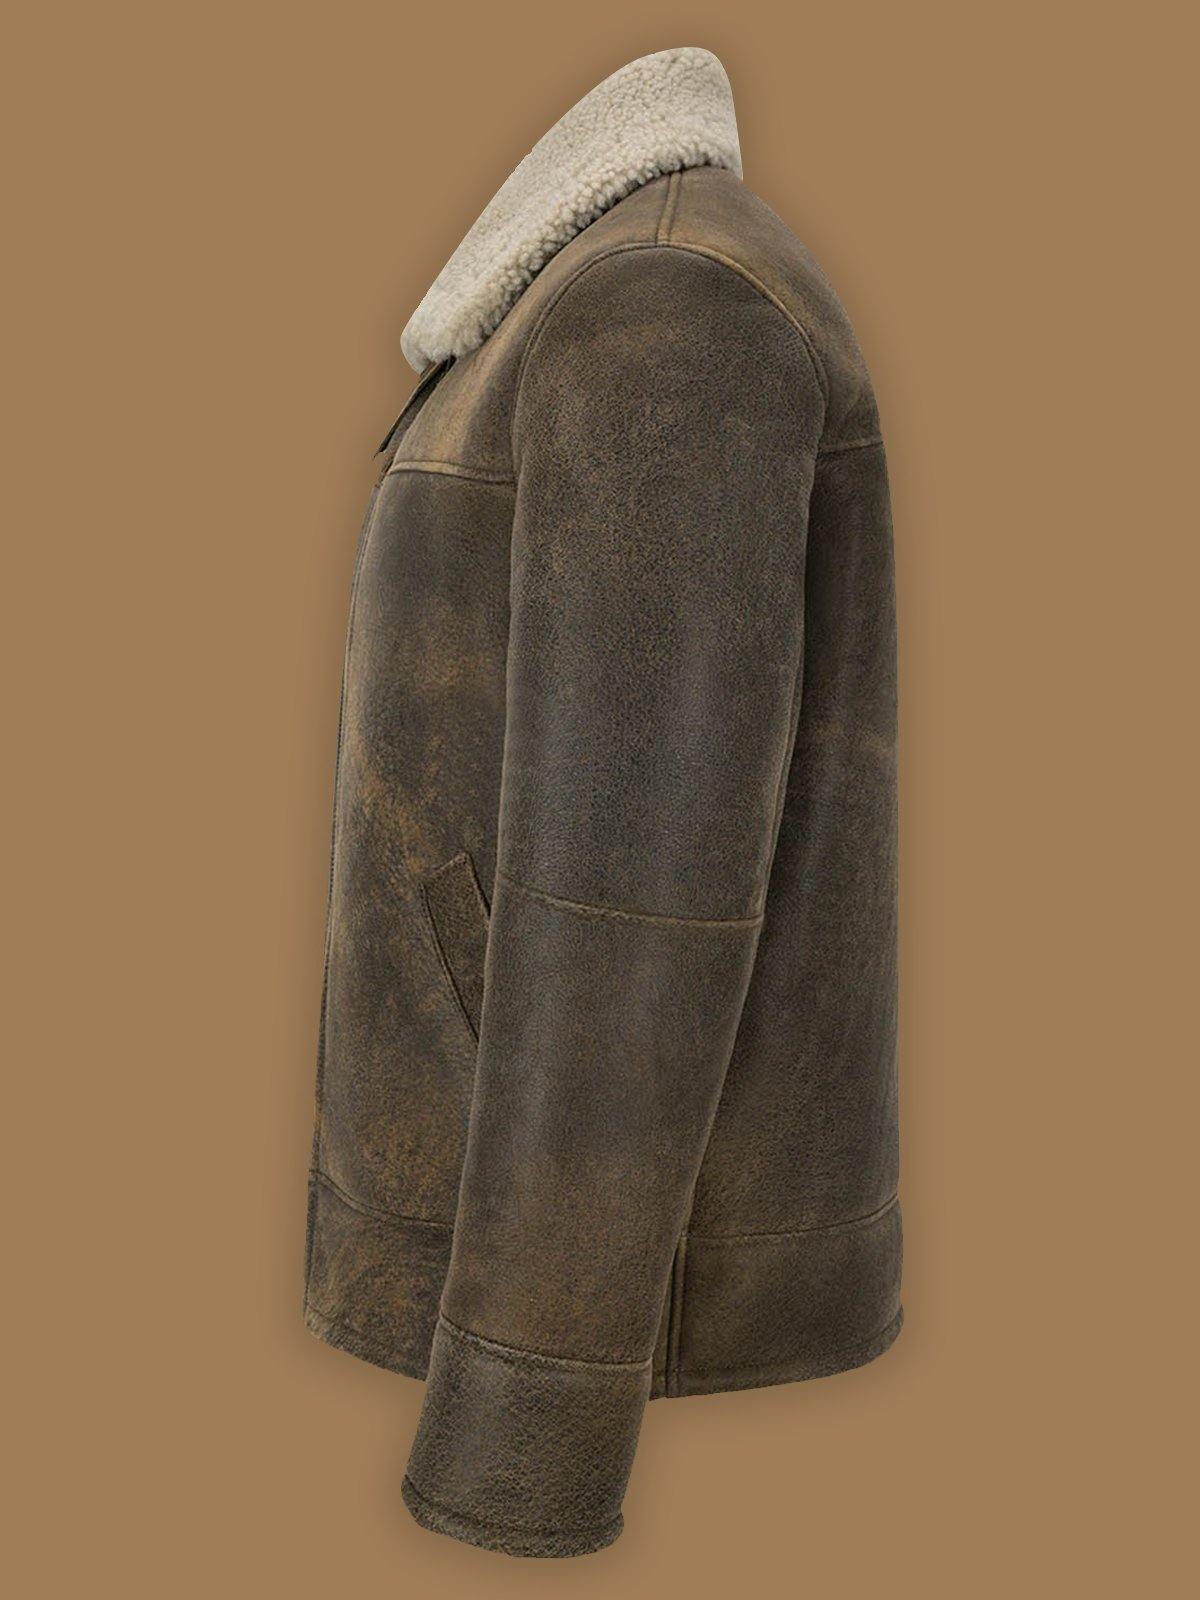 MEN OLD FASHION BROWN SHEARLING JACKET - Wiseleather